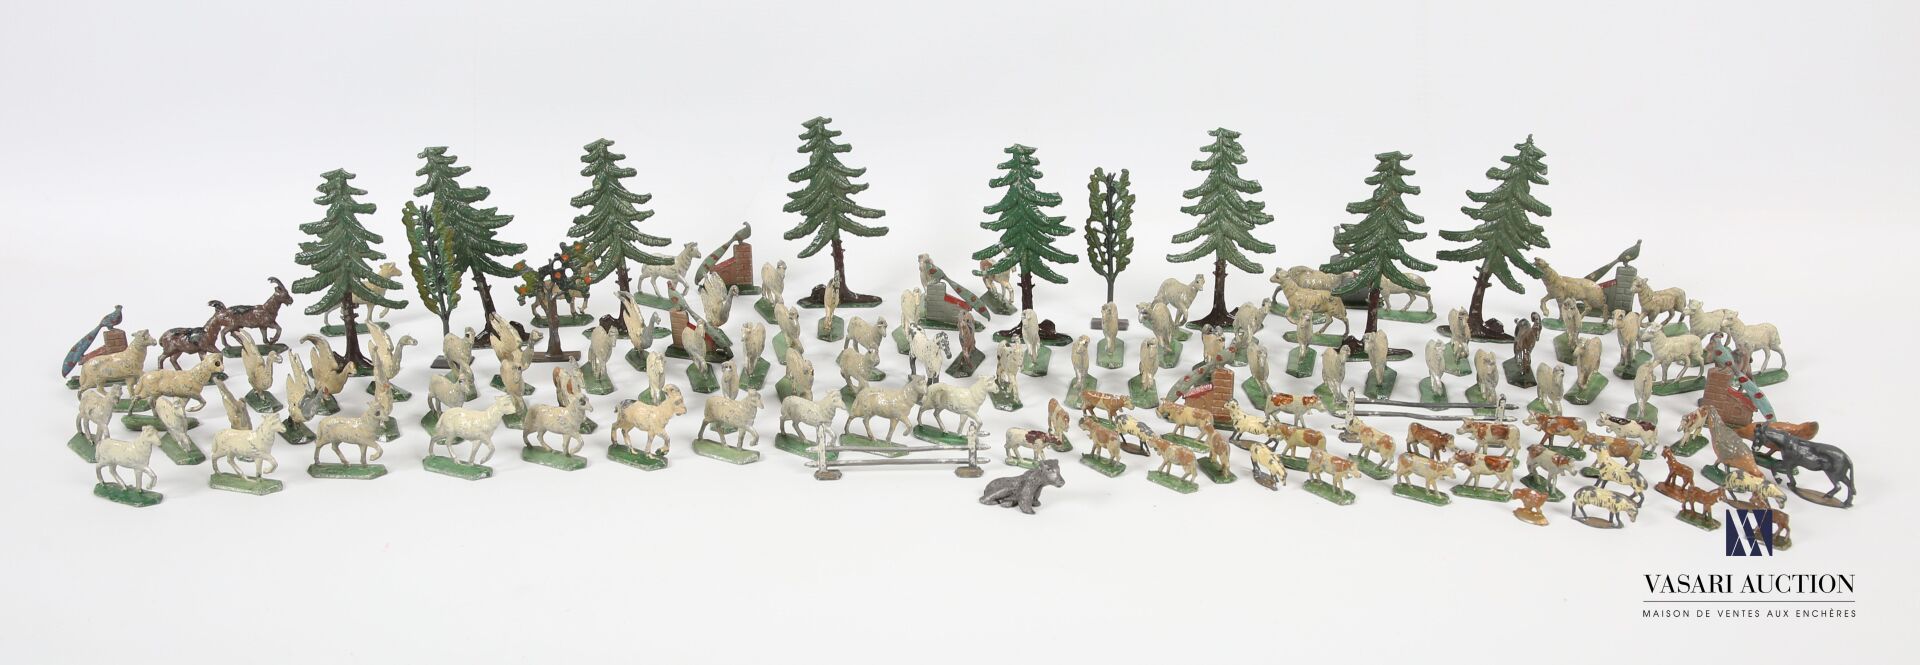 Null Lot including ten figurines fir trees and leafy trees - seventy sheep and g&hellip;